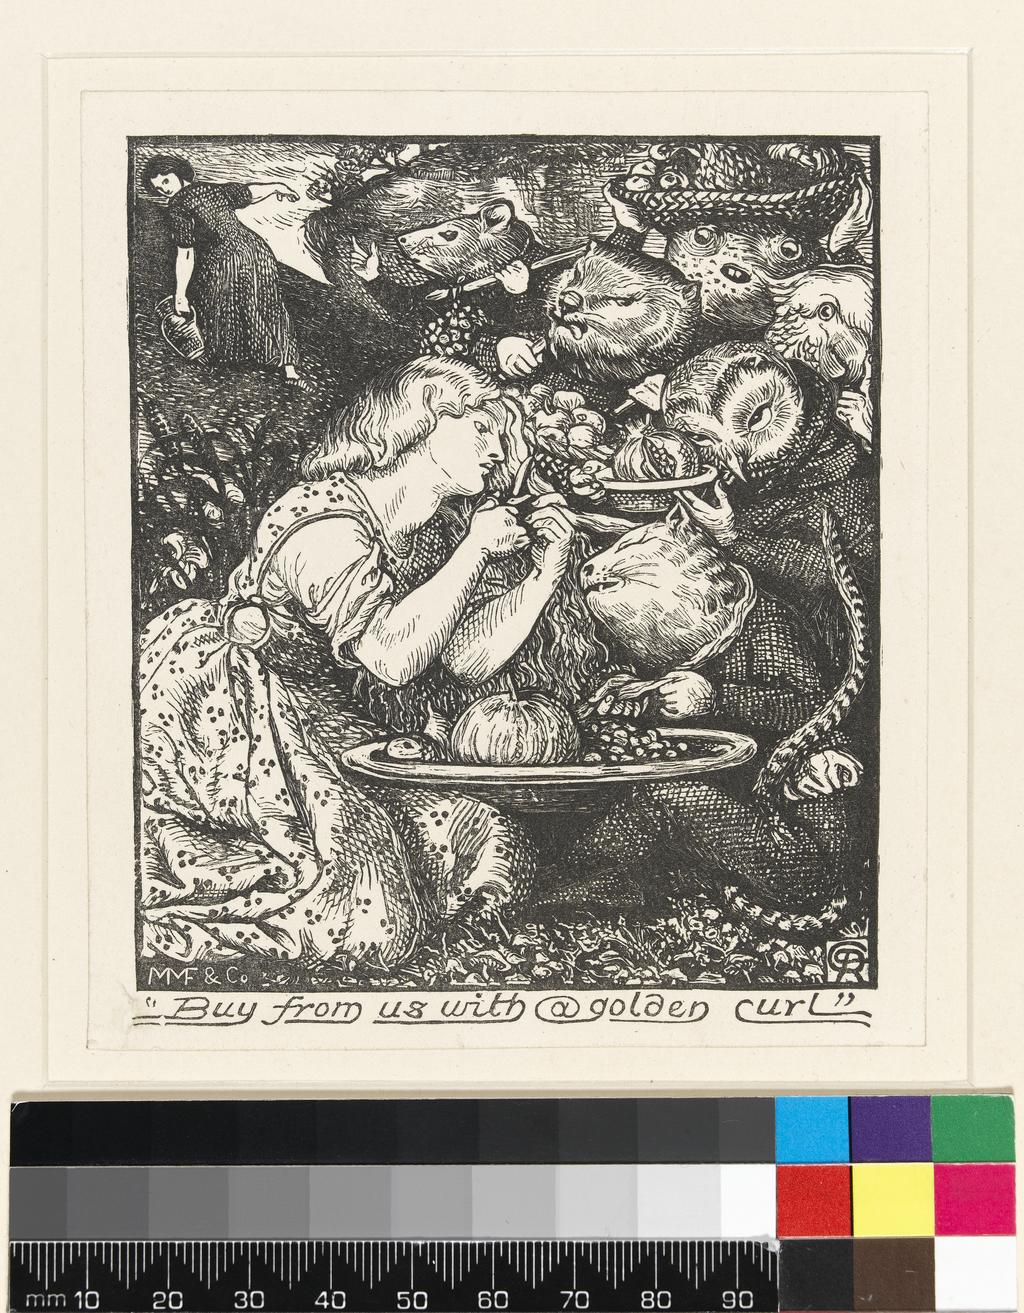 An image of Title/s: Buy from us with a golden curlGoblin Market and Other PoemsMaker/s: Rossetti, Dante Gabriel (draughtsman) British artist, 1828-1882Faulkner, John (printmaker) British artist, circa 1830-op.1887Production Notes: Proof. Illustration to Goblin Market and Other Poems by Christina Rossetti, 1862Technique/s: wood engravingMaterial/s:  black carbon ink (Medium), India paper (Support)  Dimensions:  image height: 106 mm, image width: 93 mmDate: circa 1862 